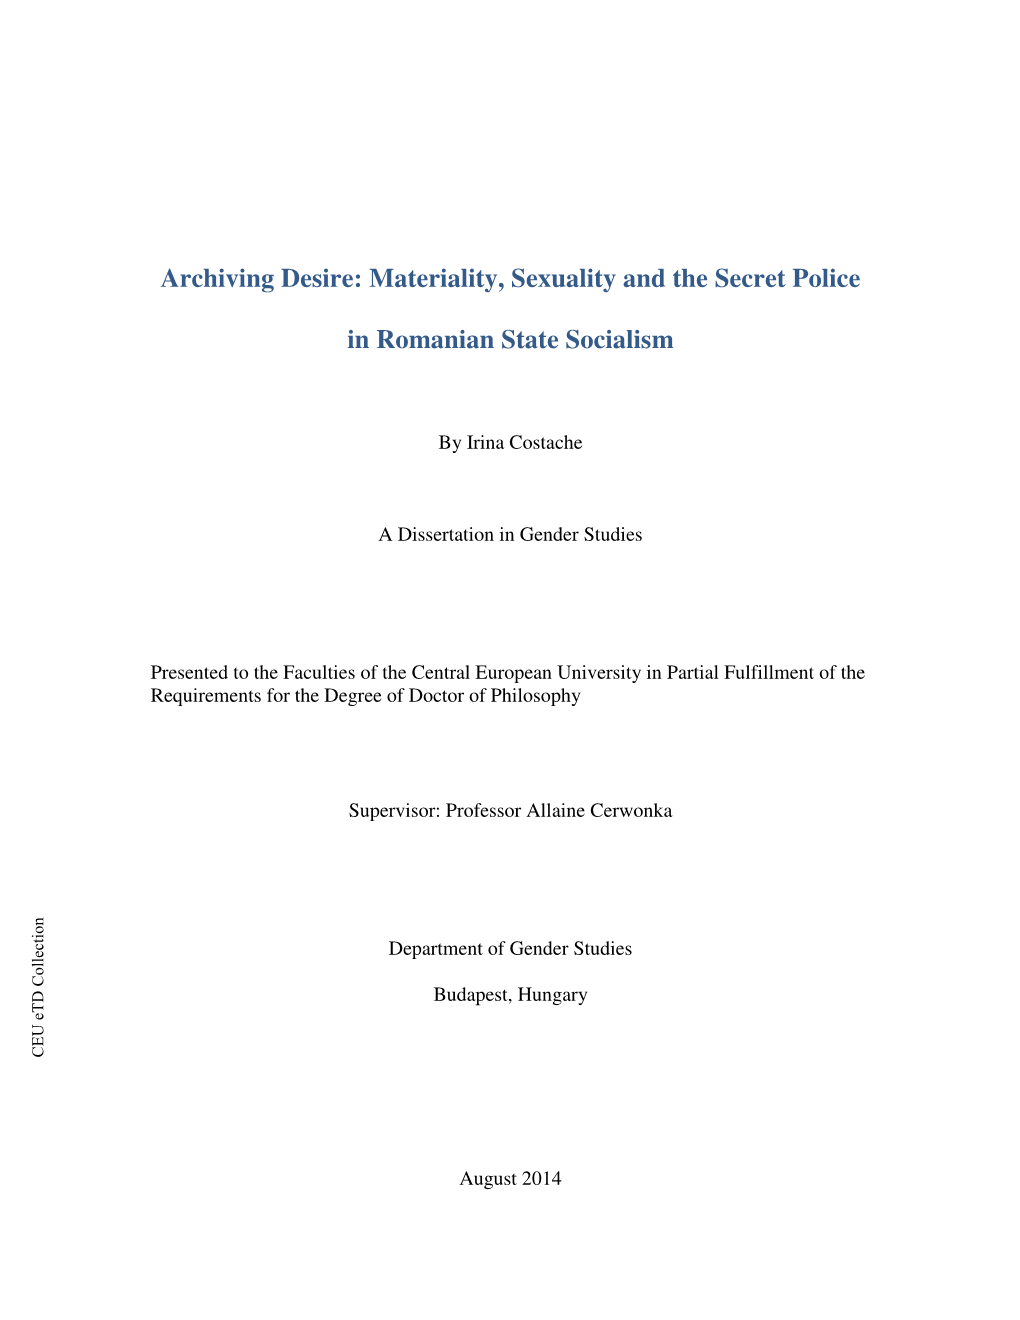 Materiality, Sexuality and the Secret Police in Romanian State Socialism